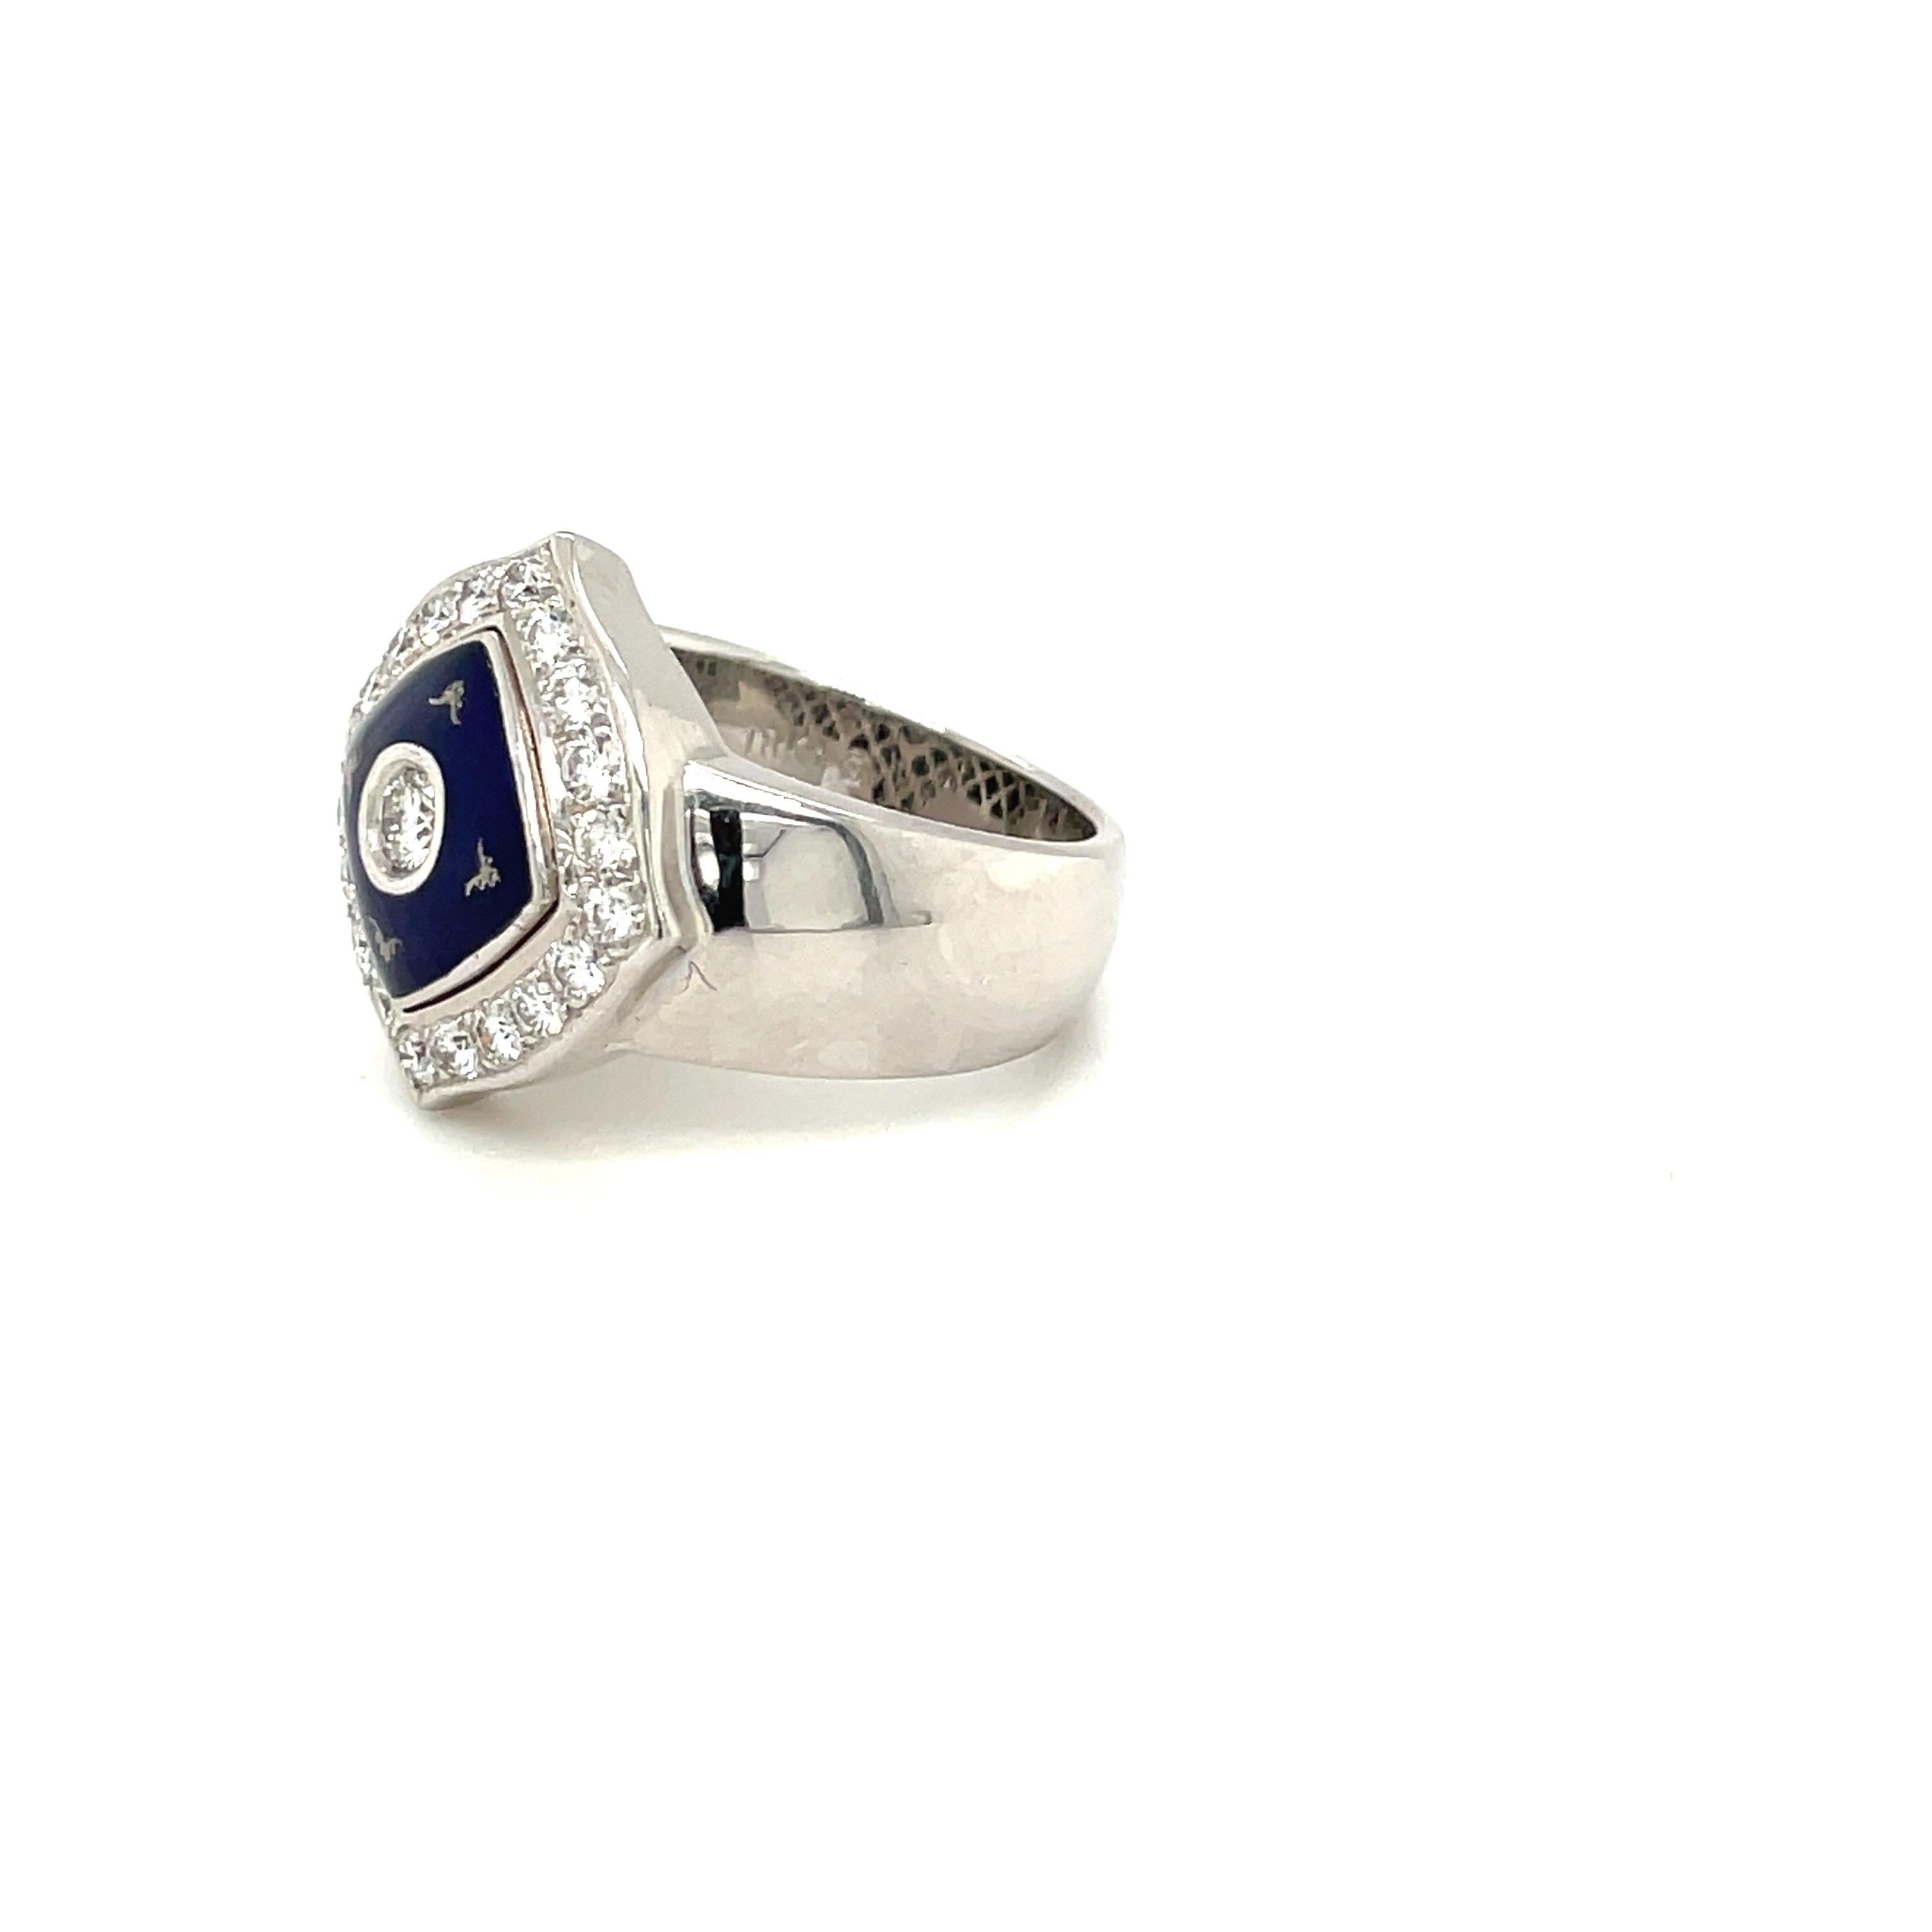 Women's or Men's Faberge 18KT White Gold Diamond 0.66 Carat & Blue Enamel Ring, with Certificate For Sale